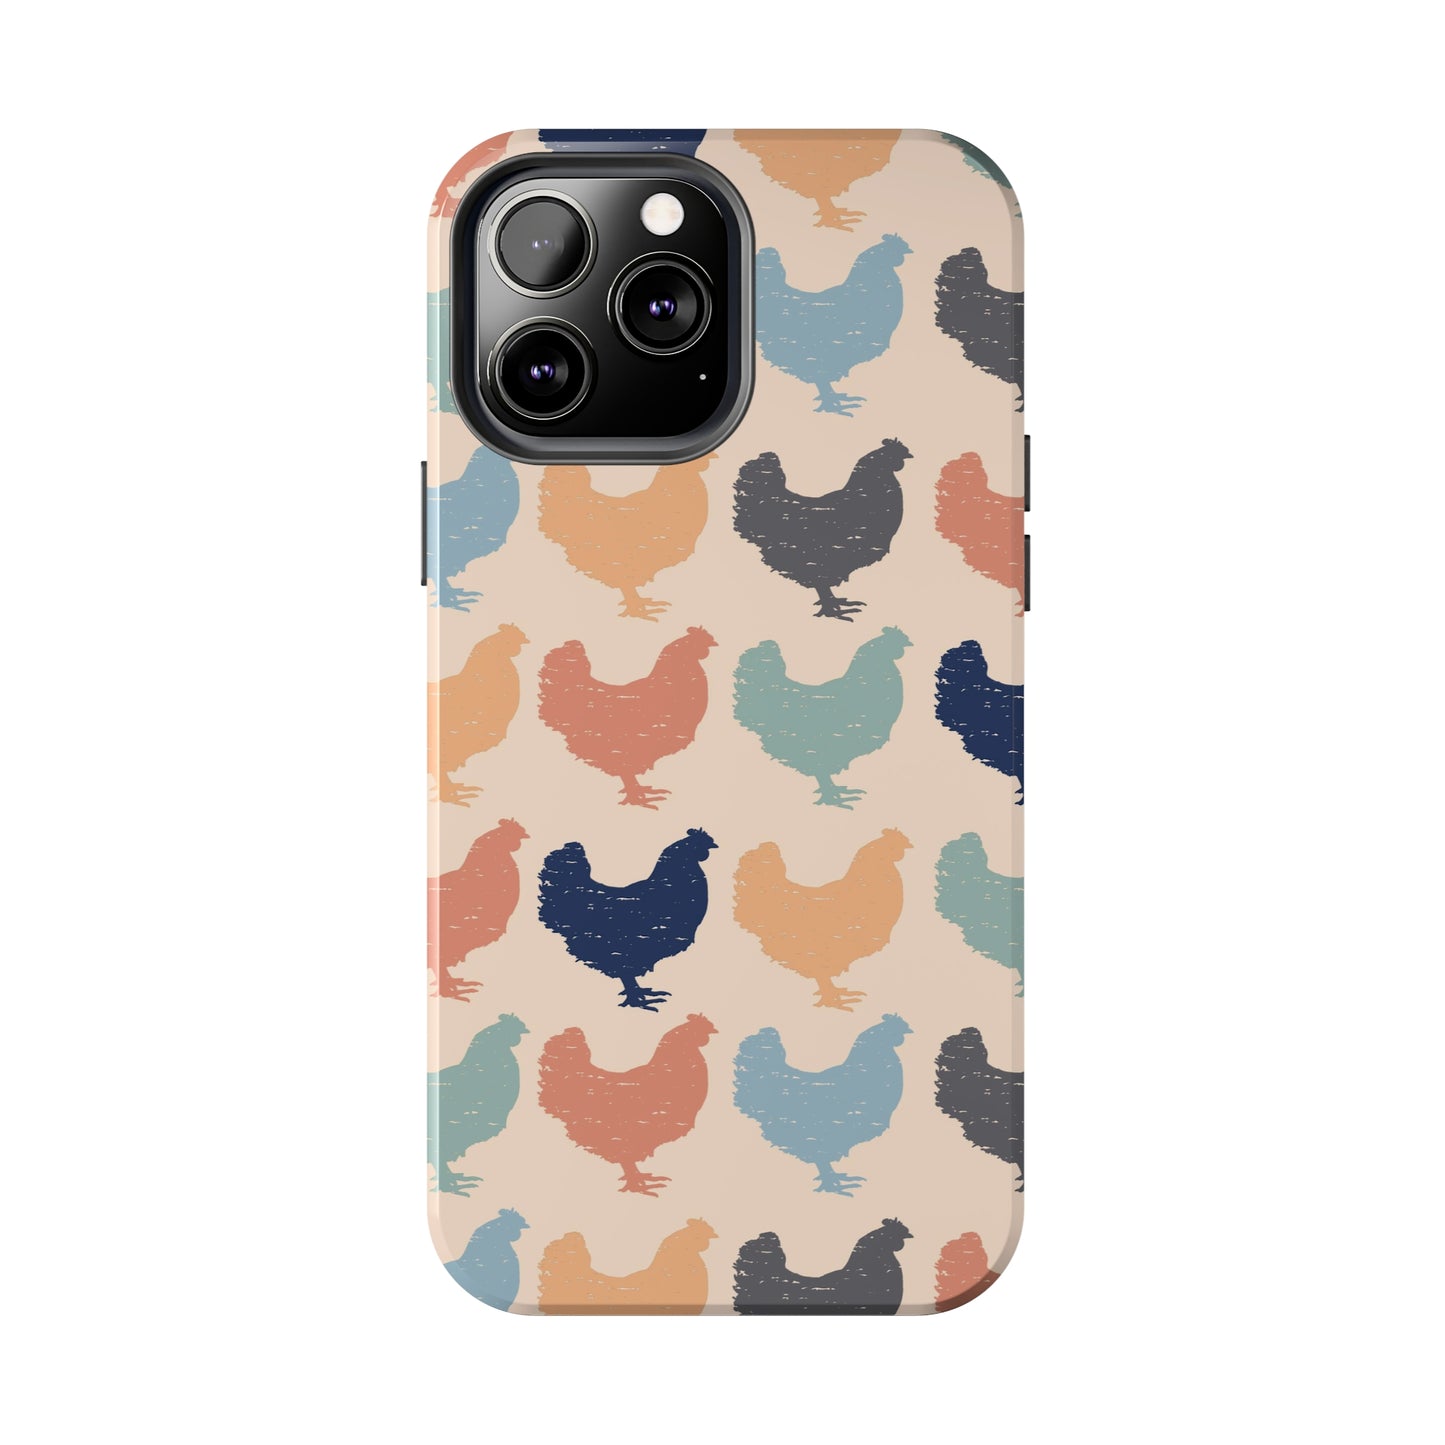 Colorful Chicken Iphone Tough Phone Cases